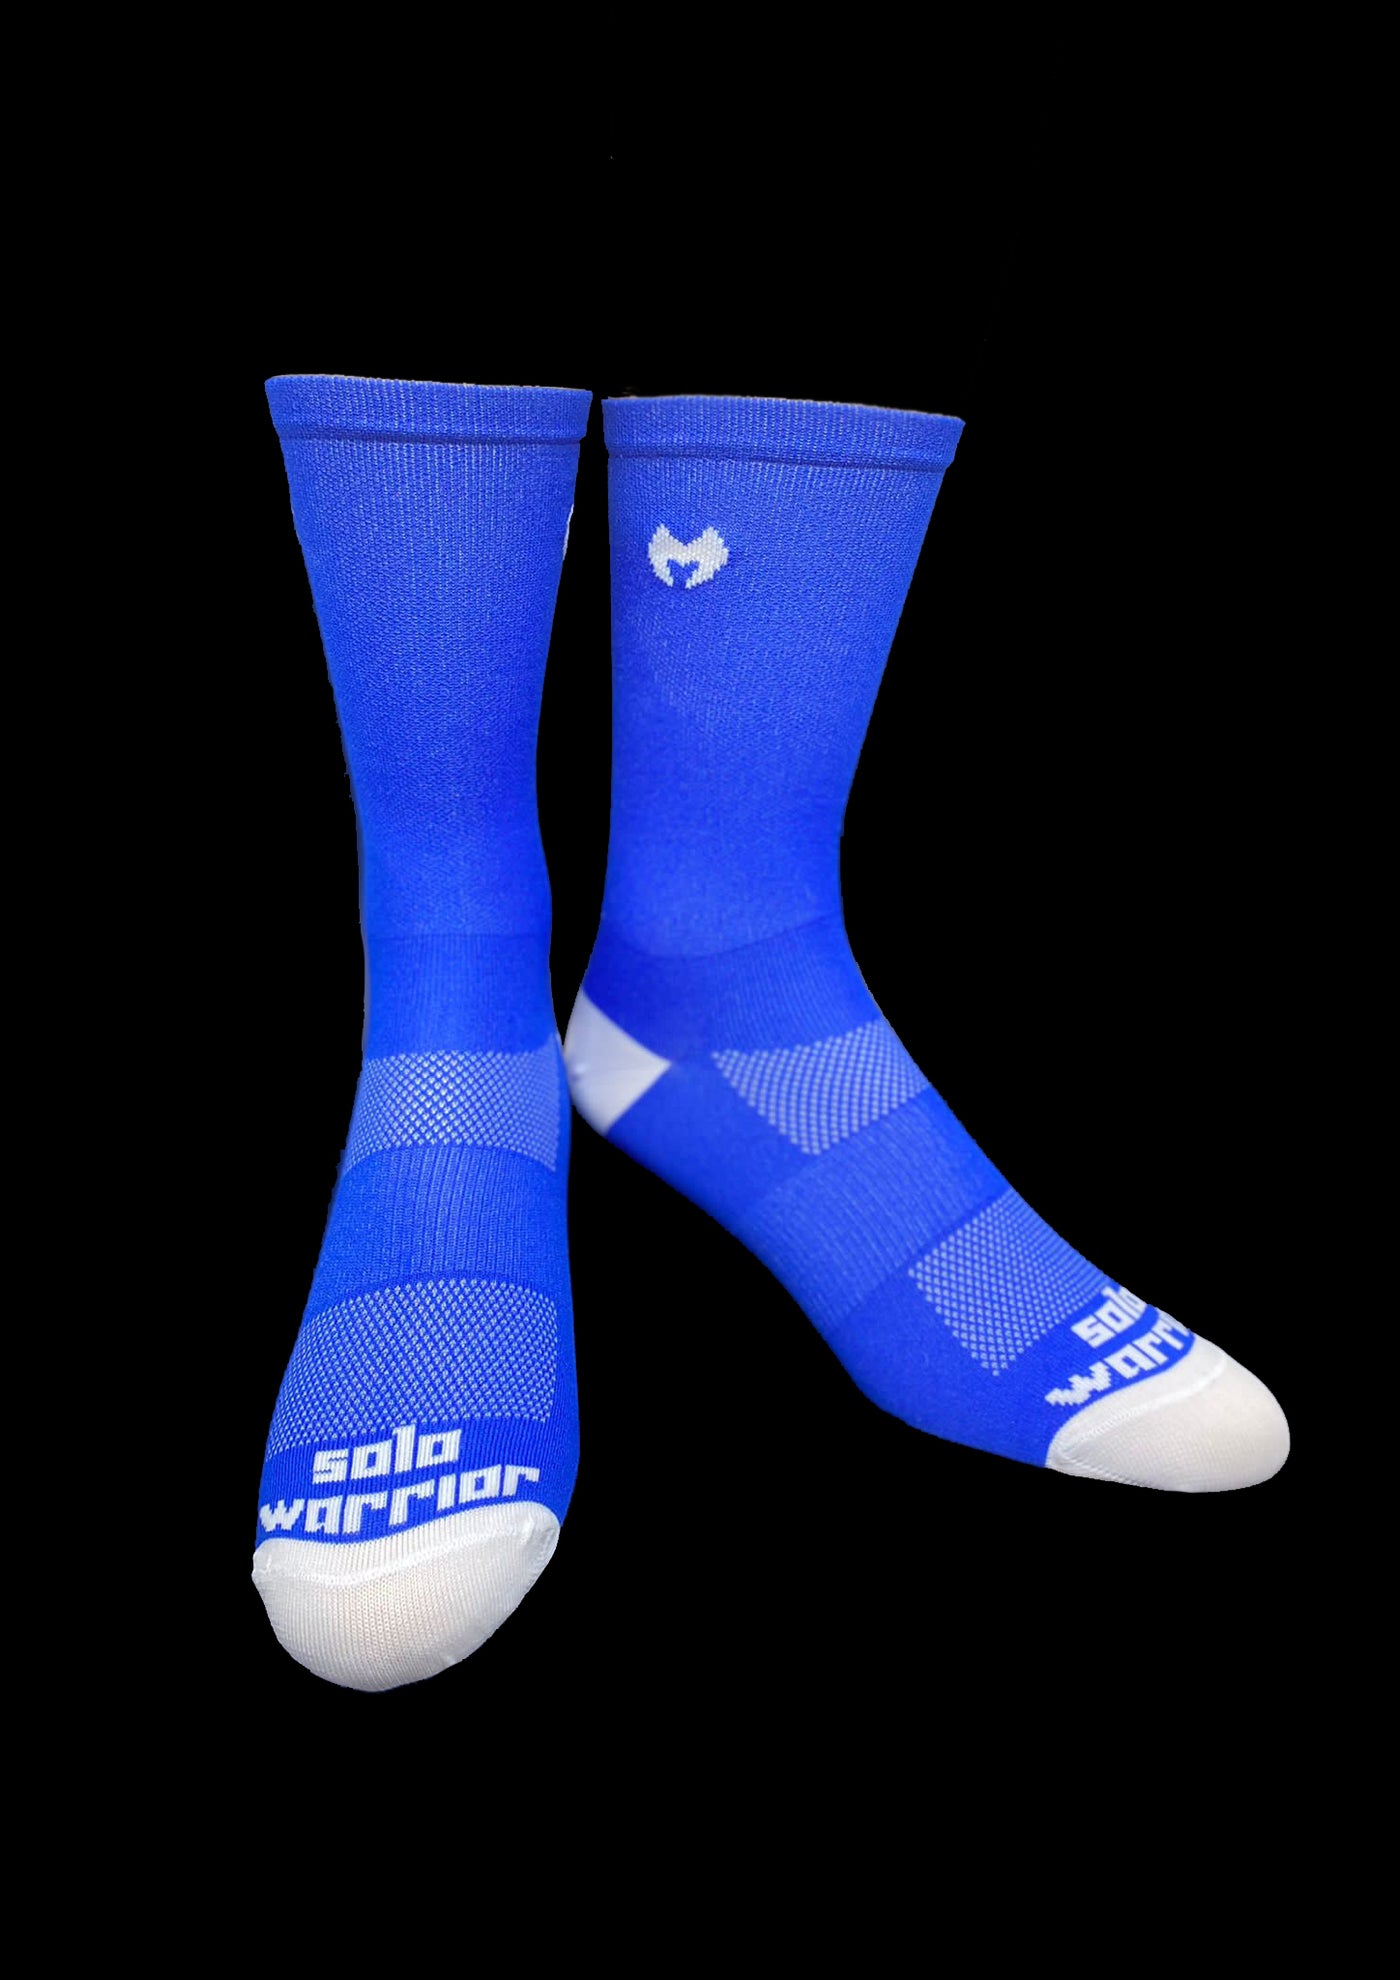 6” Men’s and Women’s solid ocean blue and white cycling sock with compression.